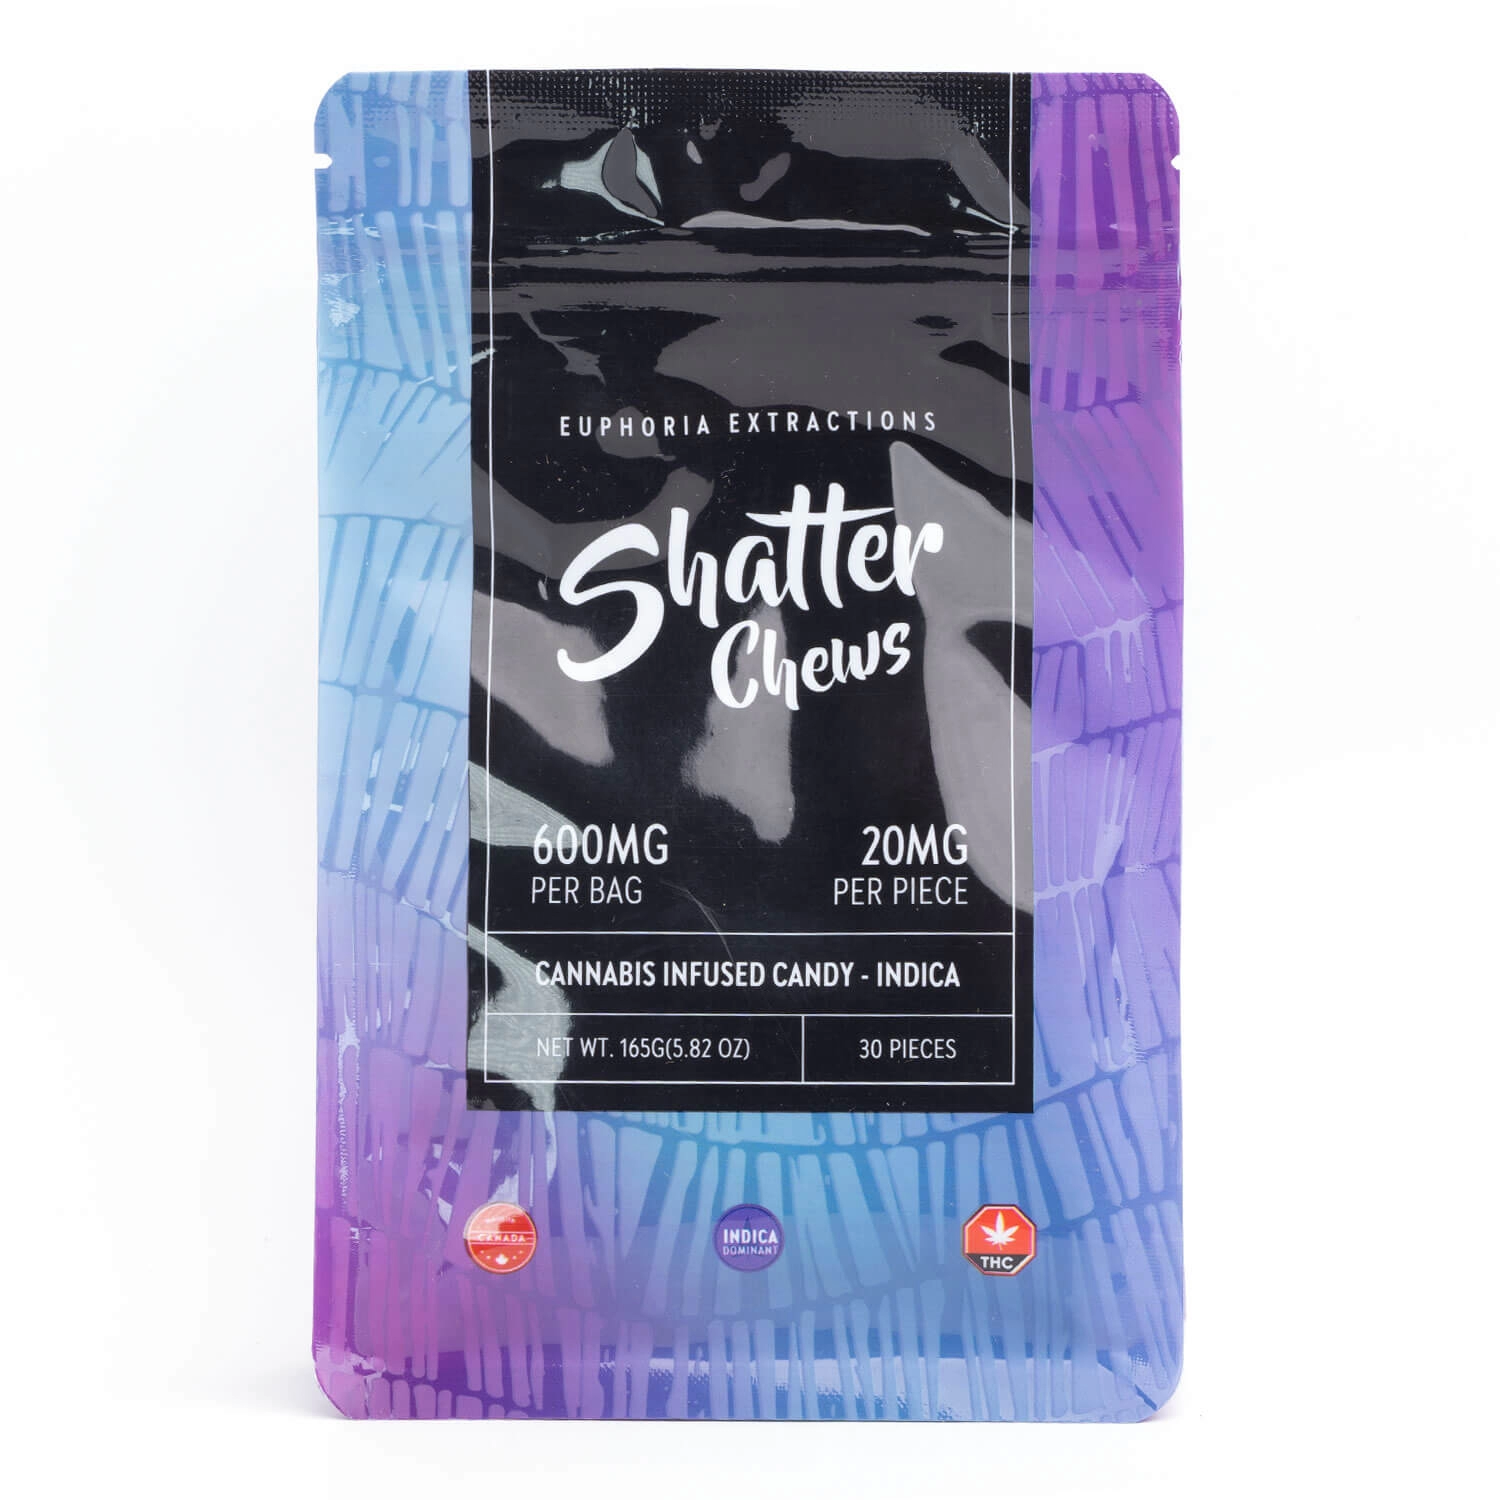 Euphoria - Shatter Chews 600mg Indica Available For Delivery - Chillin Cheetah